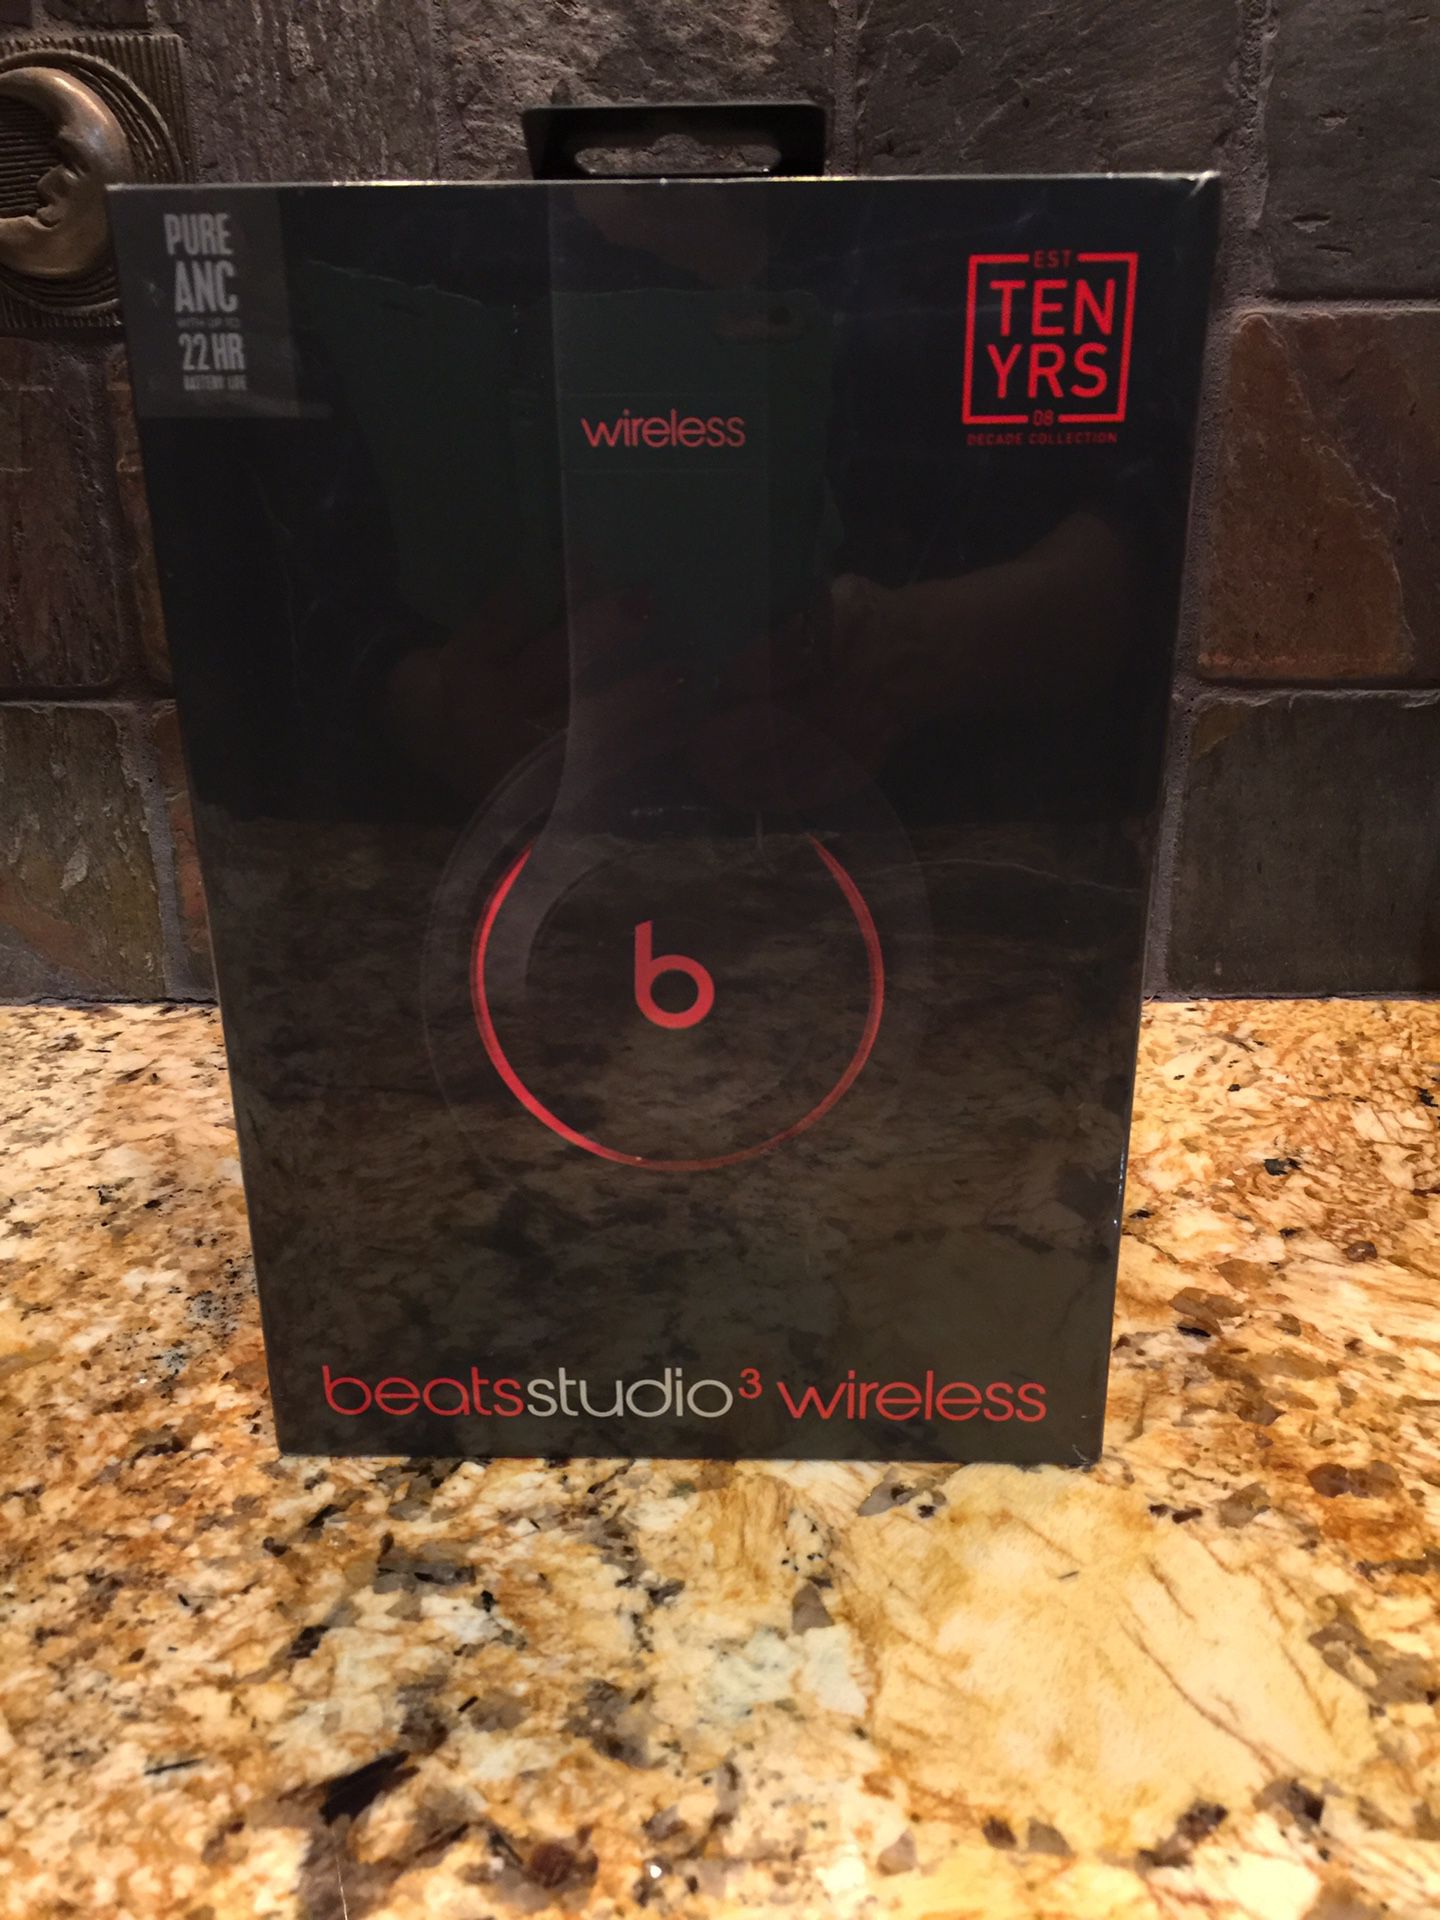 Valentine’s Day Special!! Brand New Beats Studio 3 Wireless Noise-Cancelling Headphones by Dr. Dre